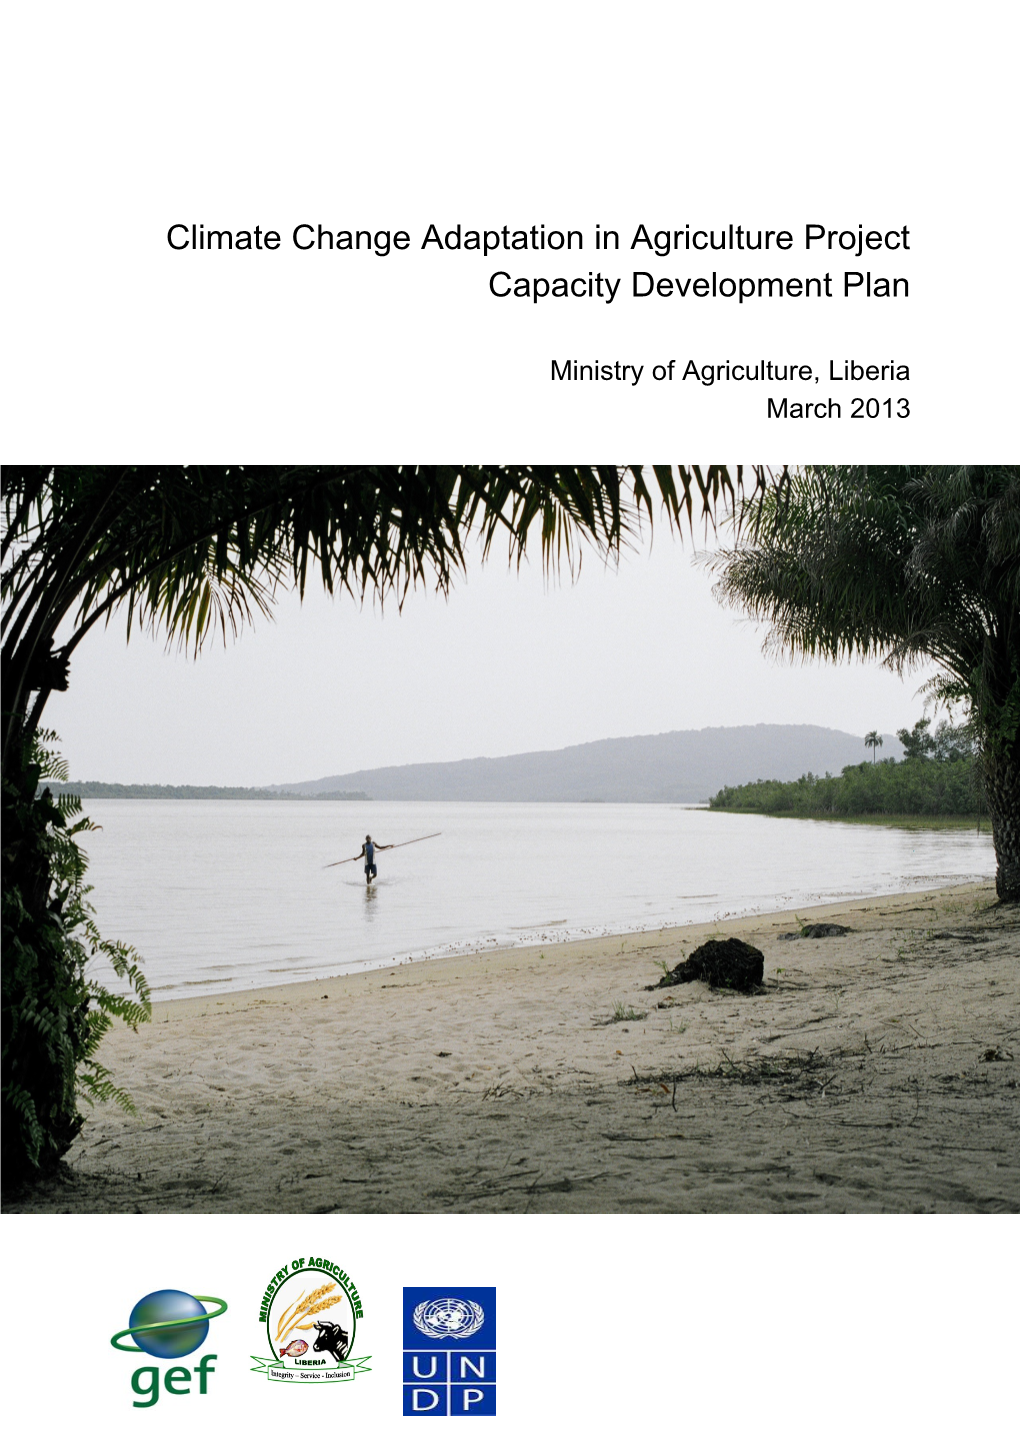 The Agriculture Adaptation Project